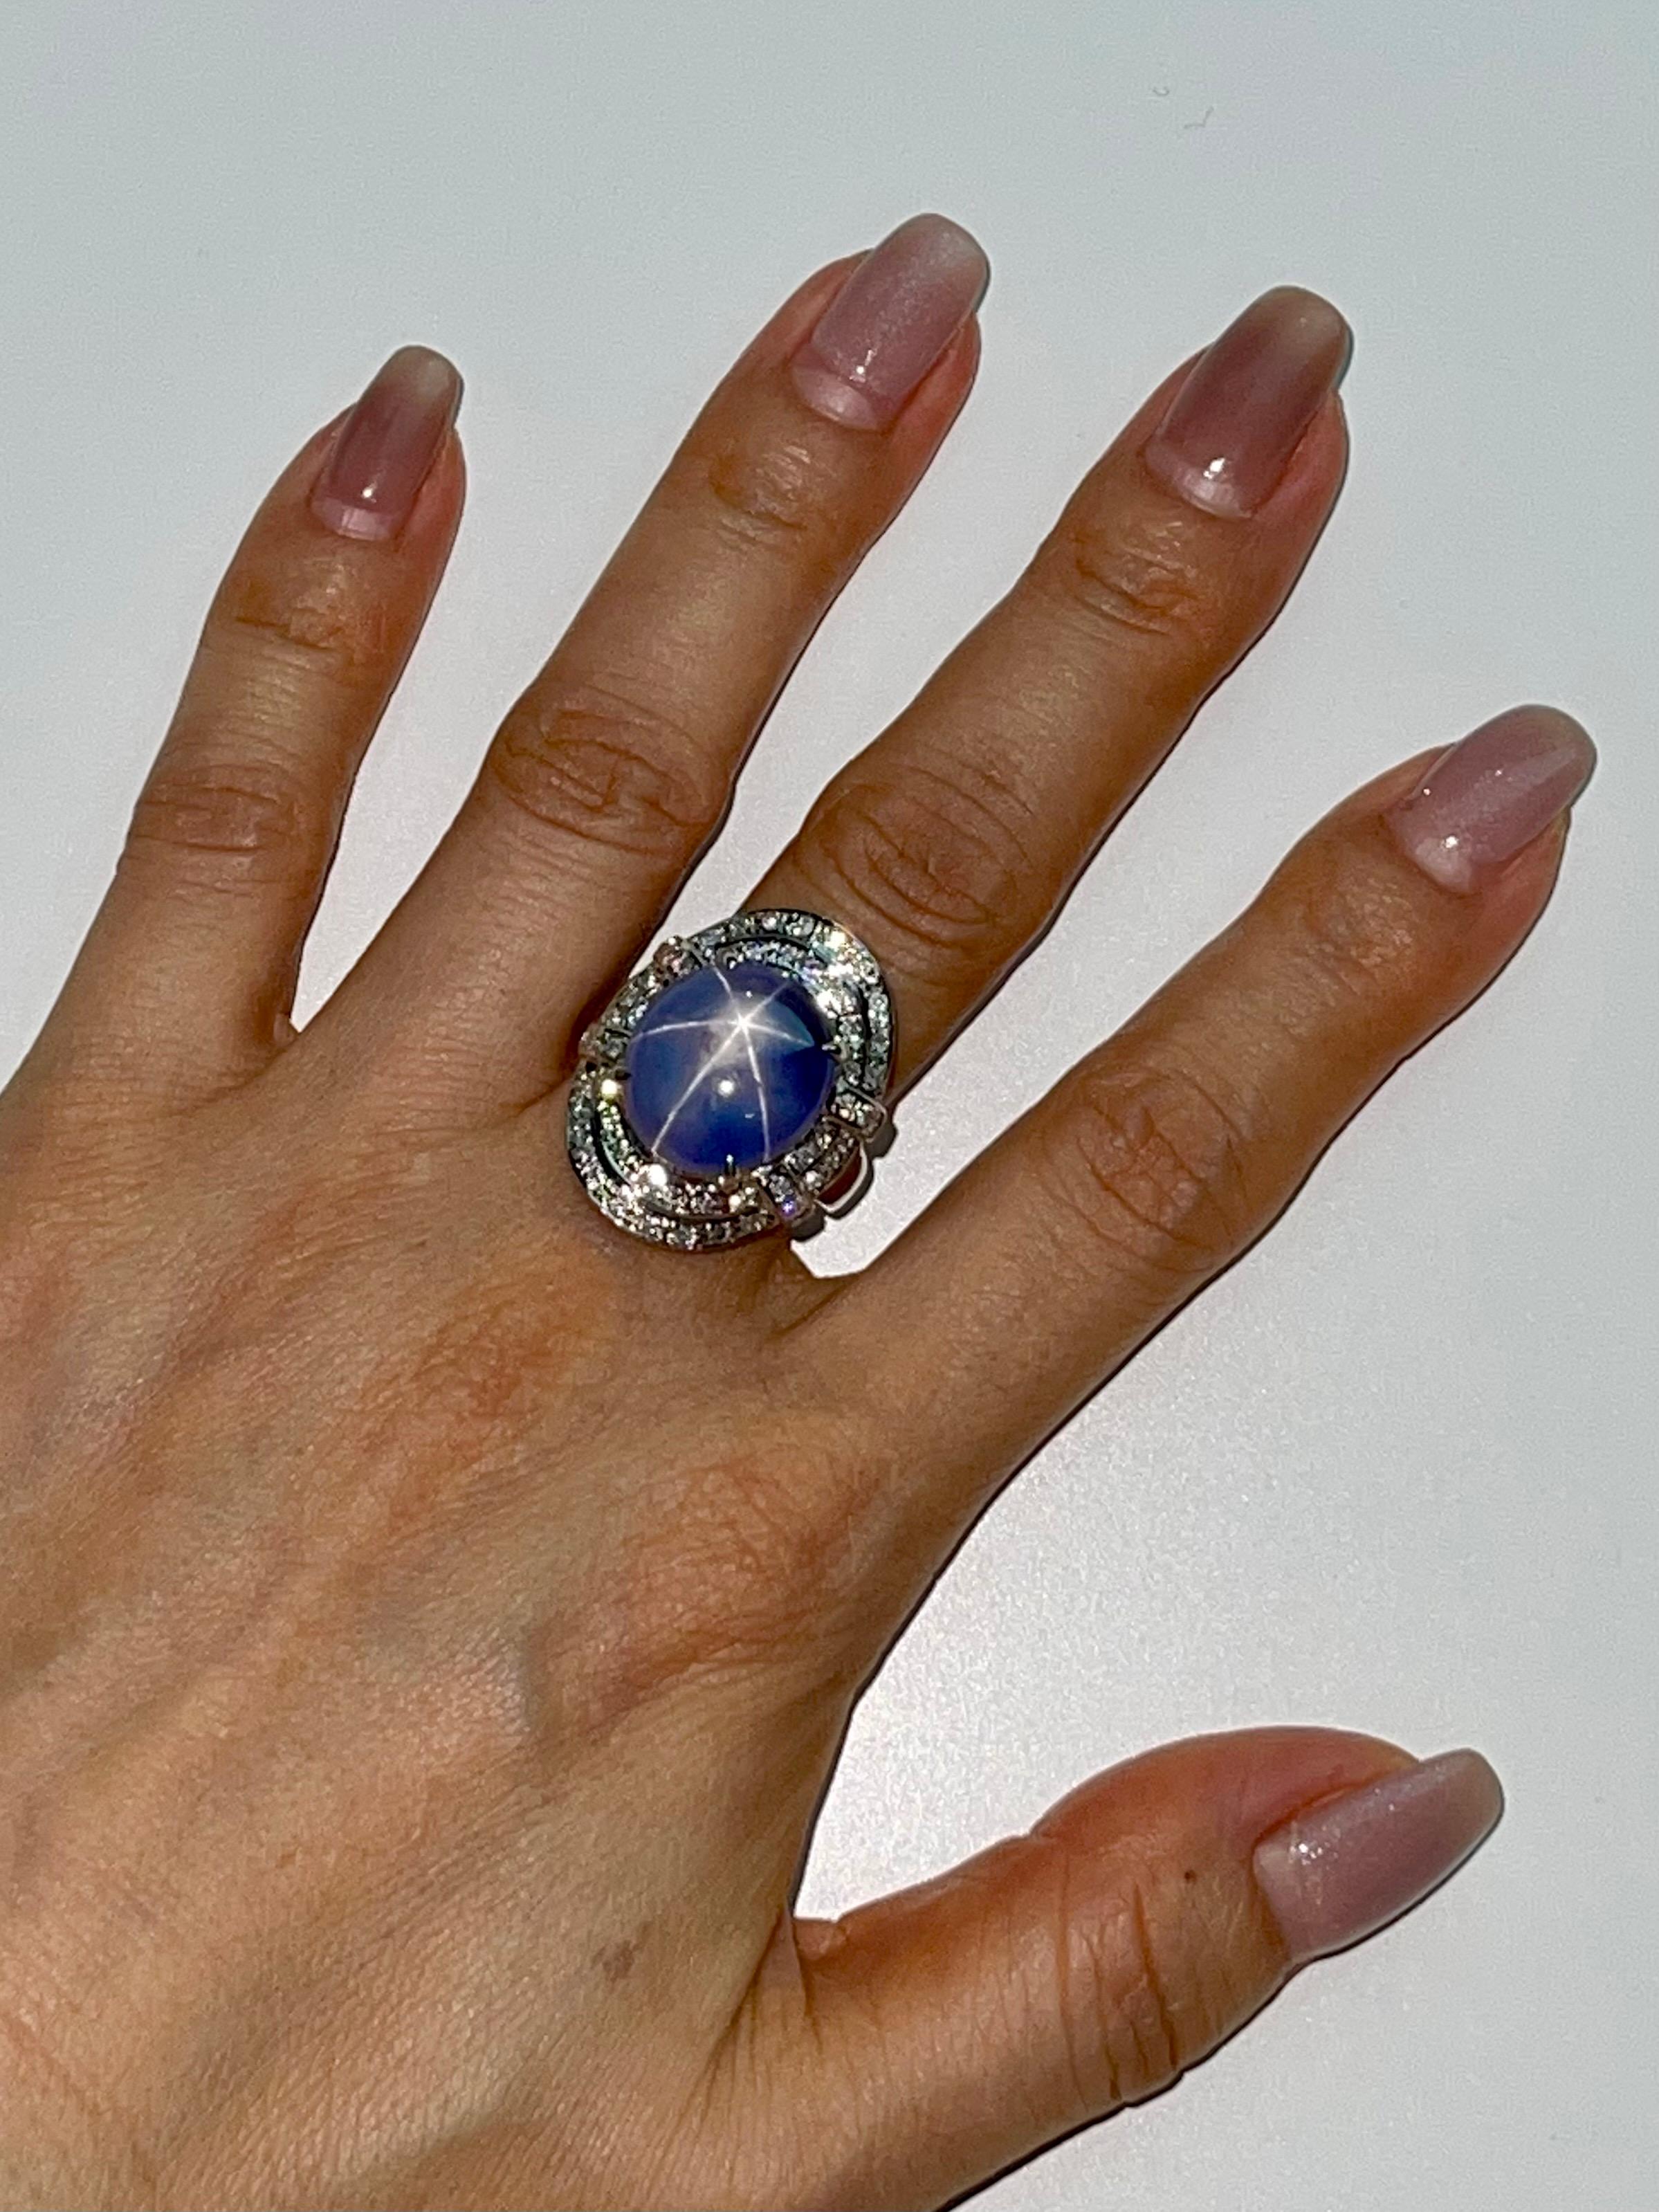 Please check out the HD Video. Here is a superb oversized natural star Sapphire and diamond ring. The ring is set in platinum and diamonds. There are diamonds totaling 0.56 Cts. The star sapphire is impressive in size at over 19 cts. The star